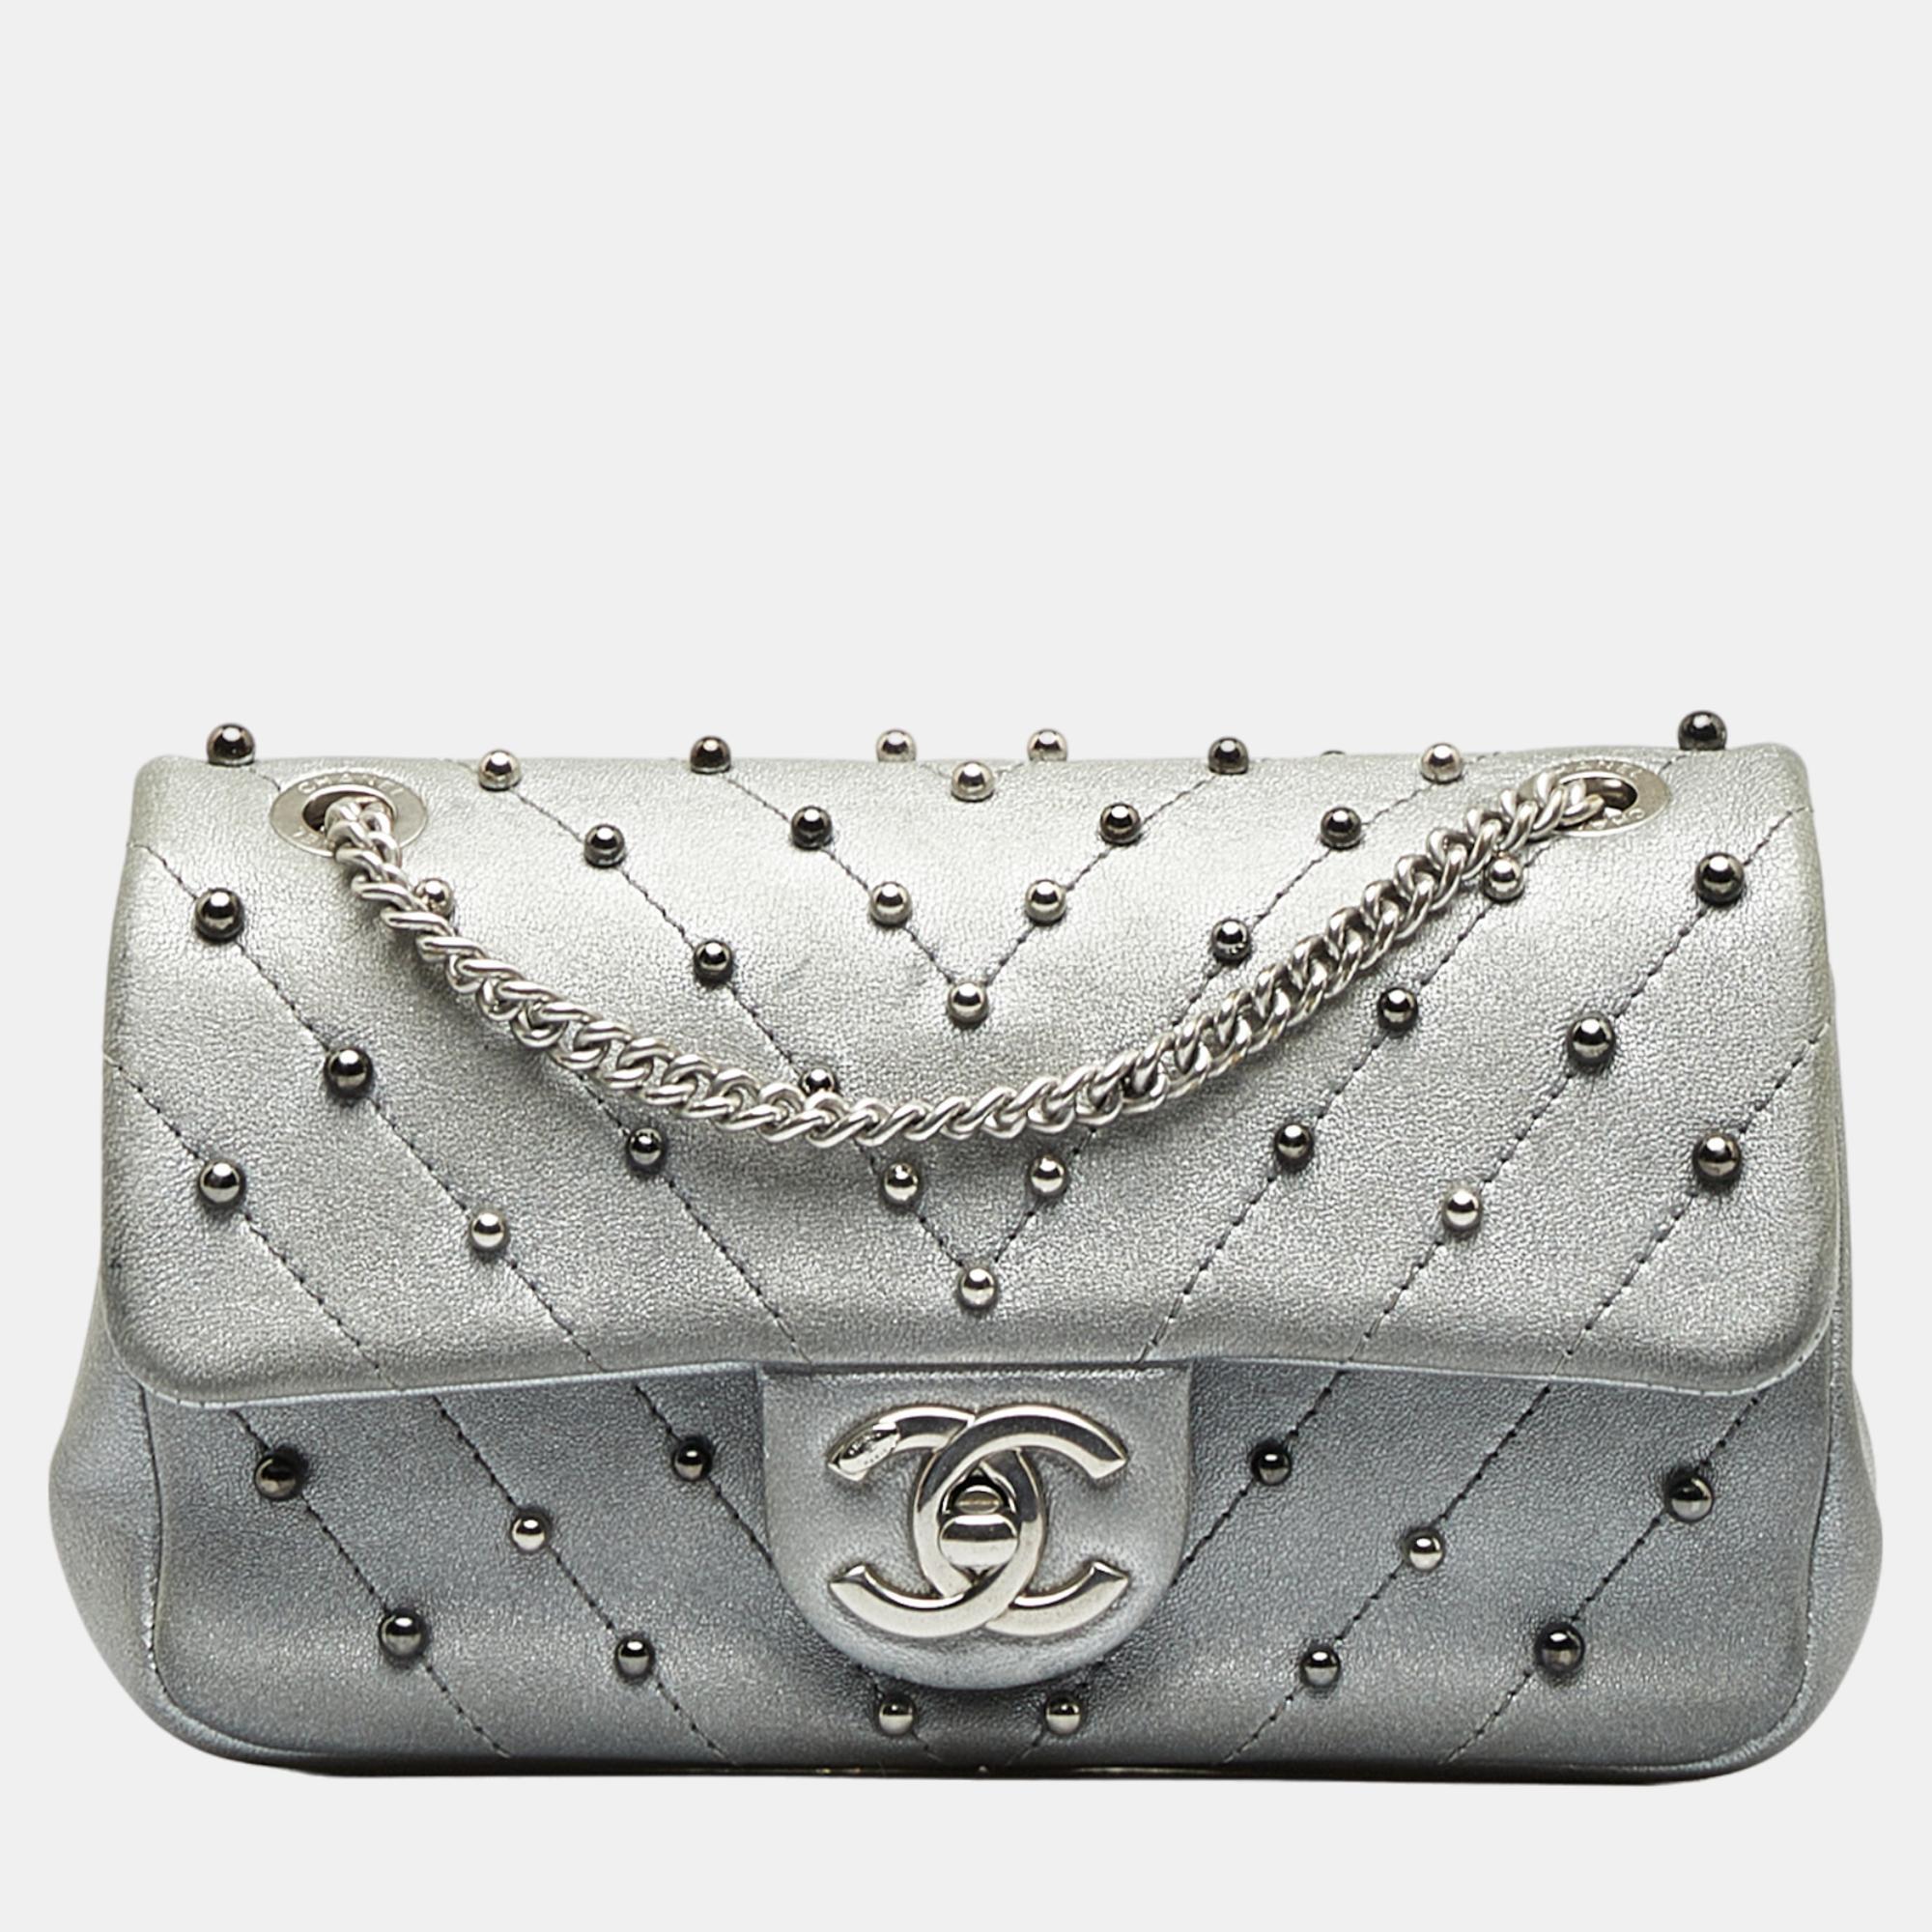 Chanel silver small studded chevron flap